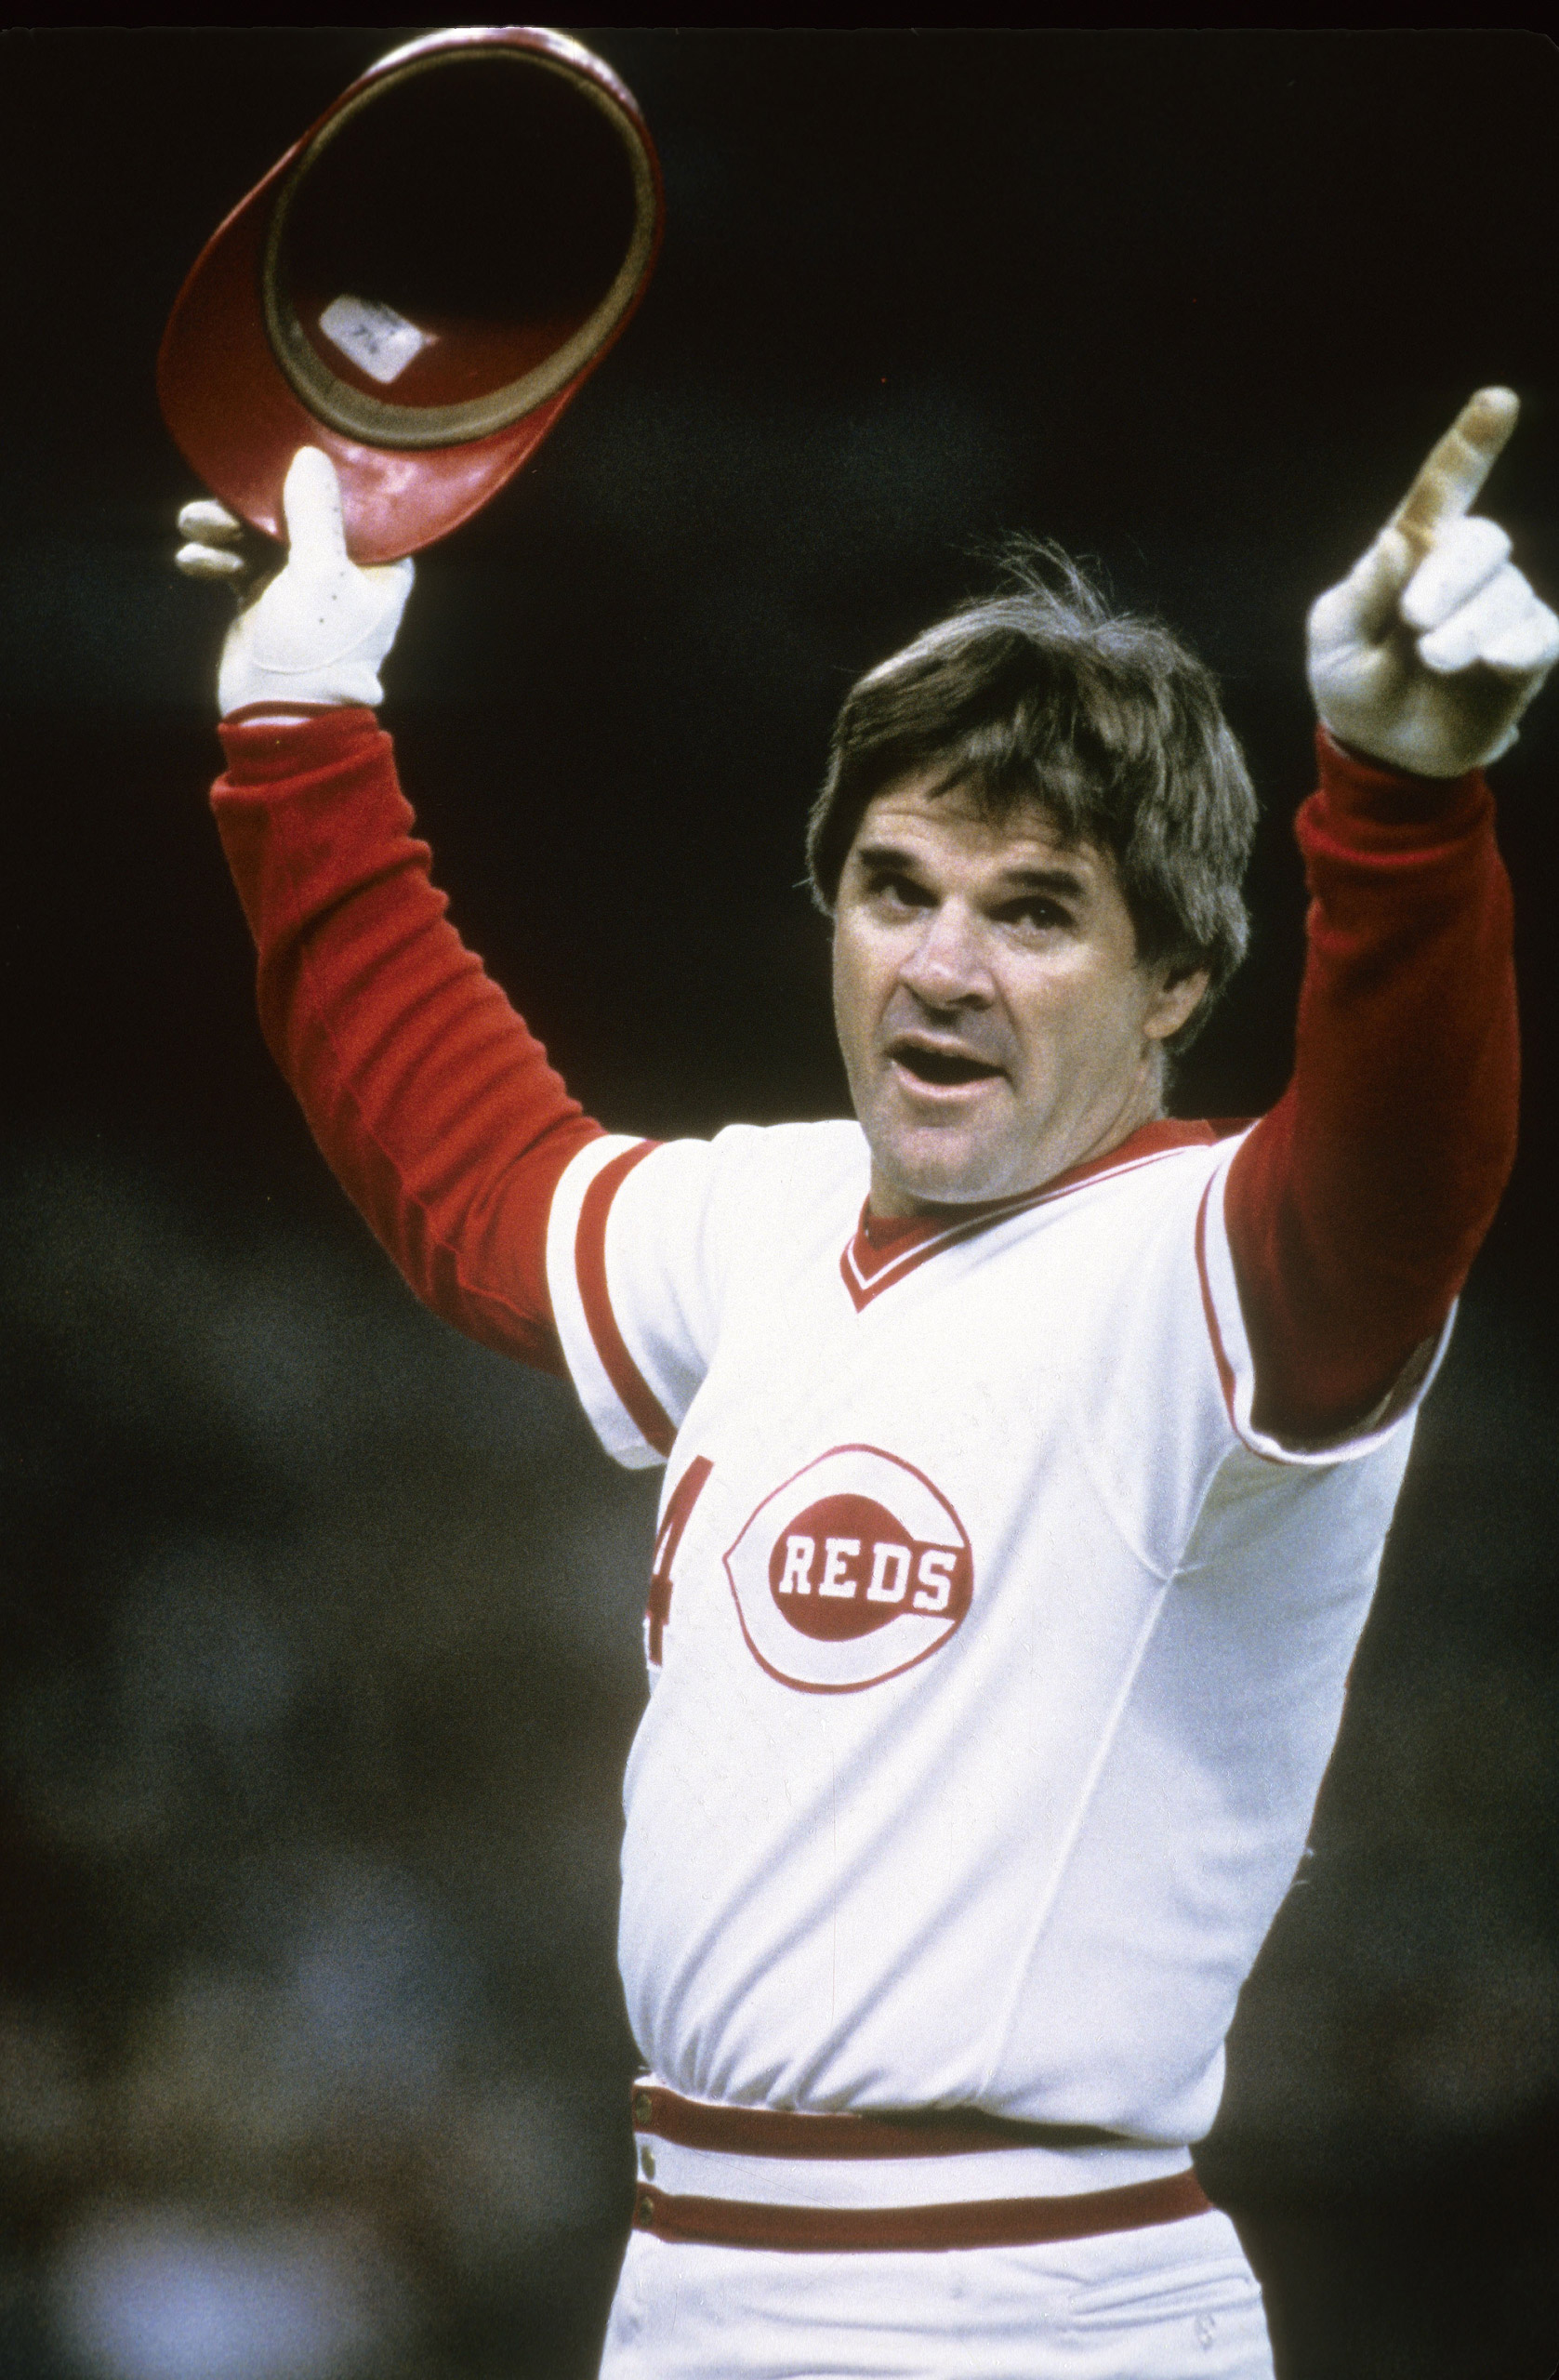 Outfielder Pete Rose #14 of the Cincinnati Reds salutes the crowd after surpassing Ty Cobb with his 4,192th hit that came against San Diego Padres pitcher Eric Show on Sept. 11, 1985, at Riverfront Stadium in Cincinnati, Ohio.